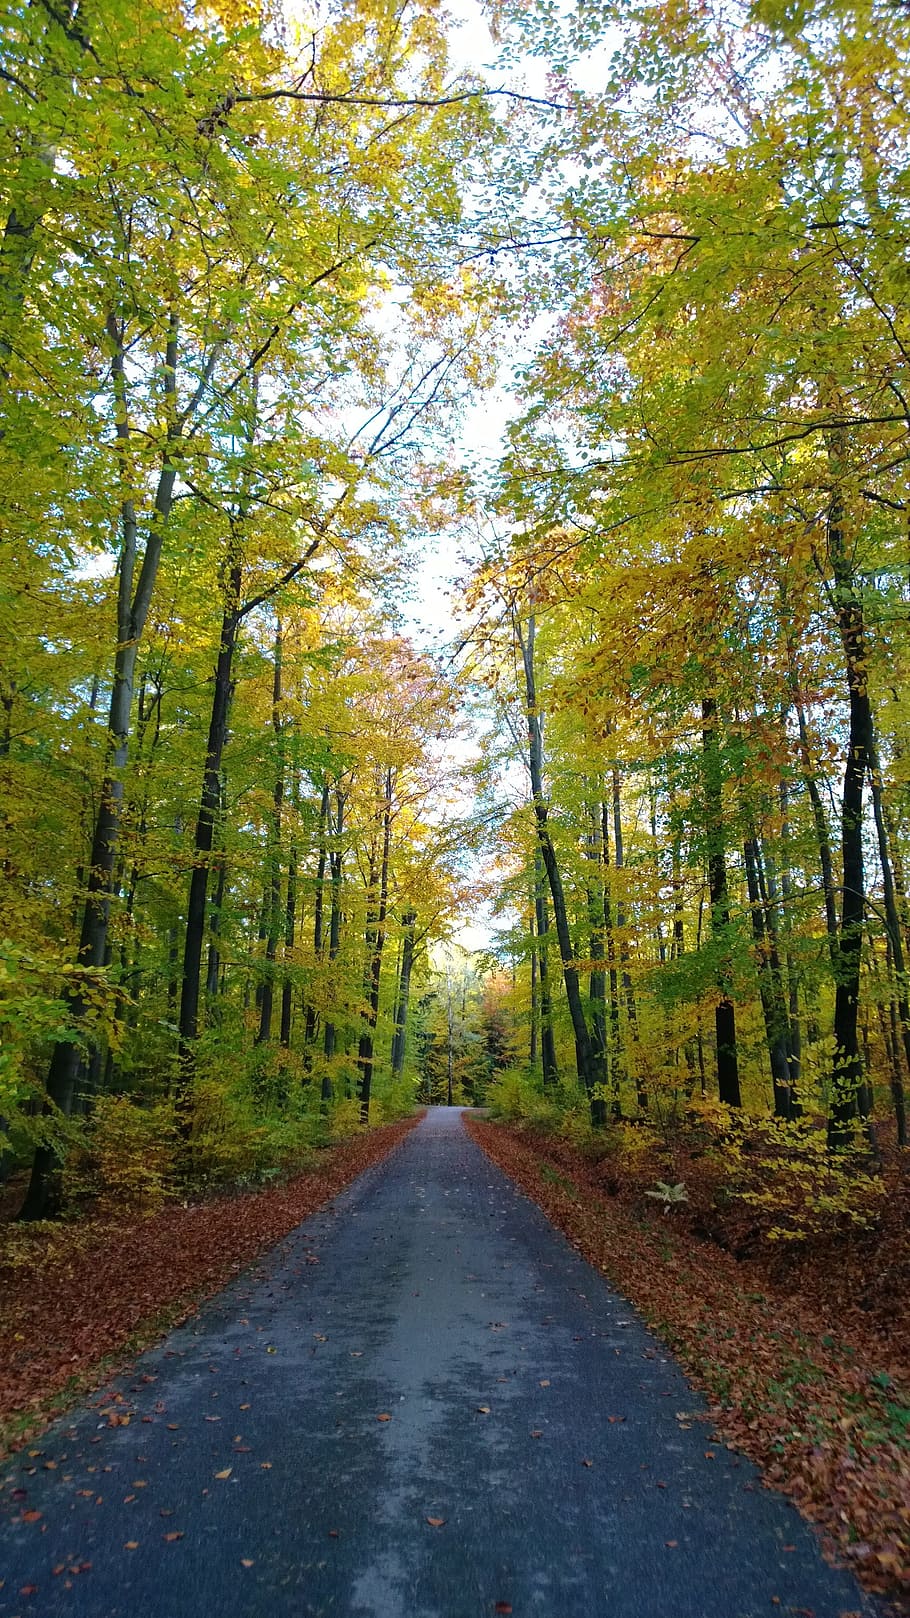 Autumn, Landscape, Forest, Away, forest path, road, leaves, colorful, mood, germany